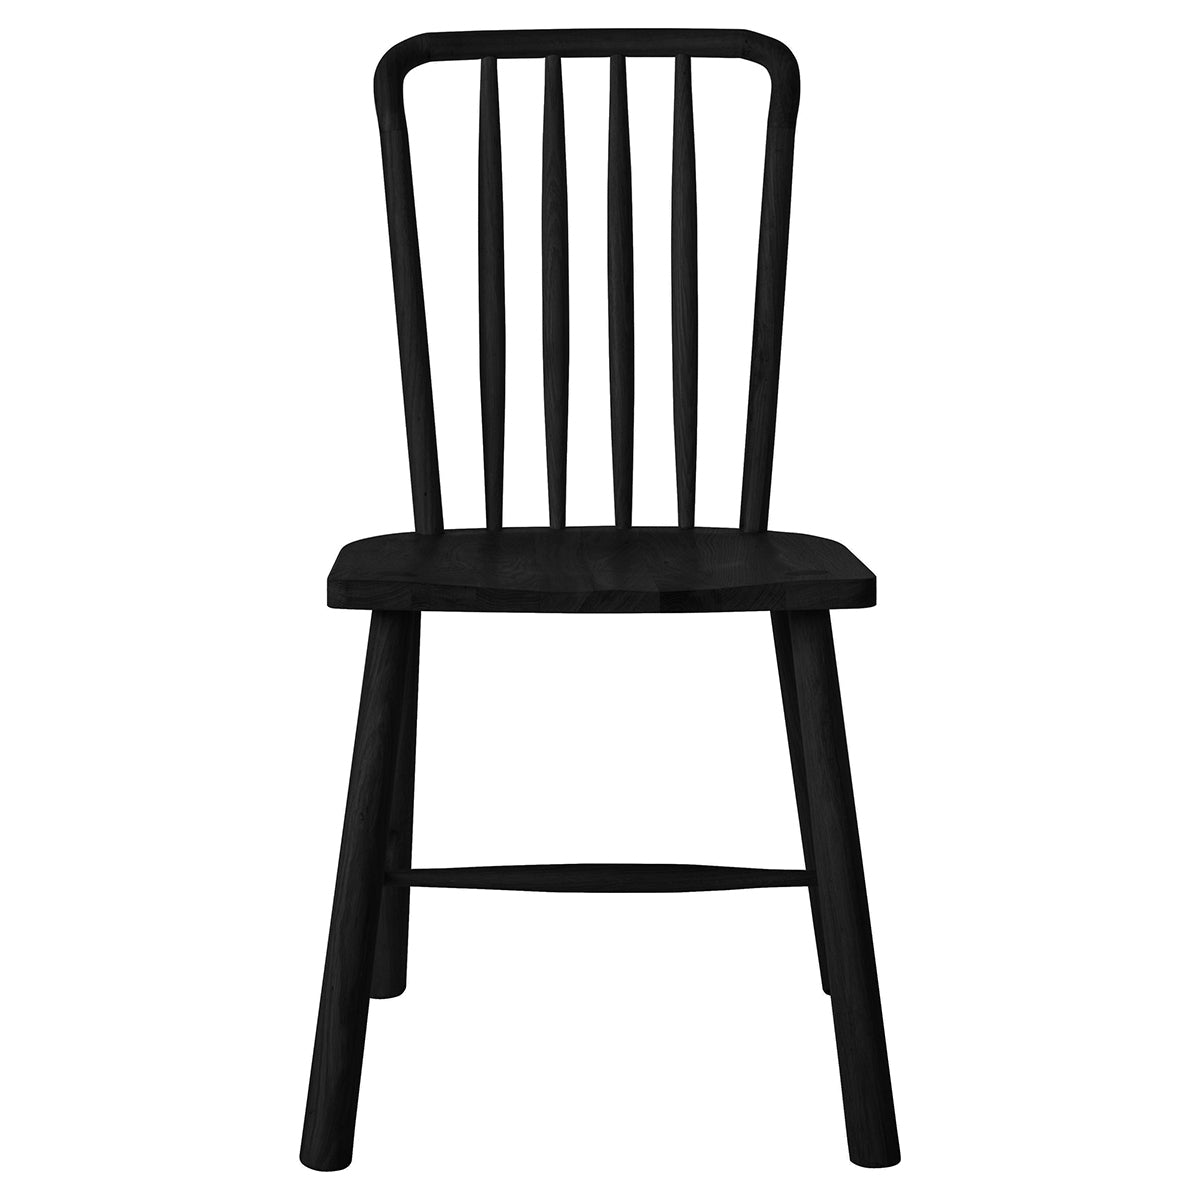 Coombe Dining Chair BlackSet of 2